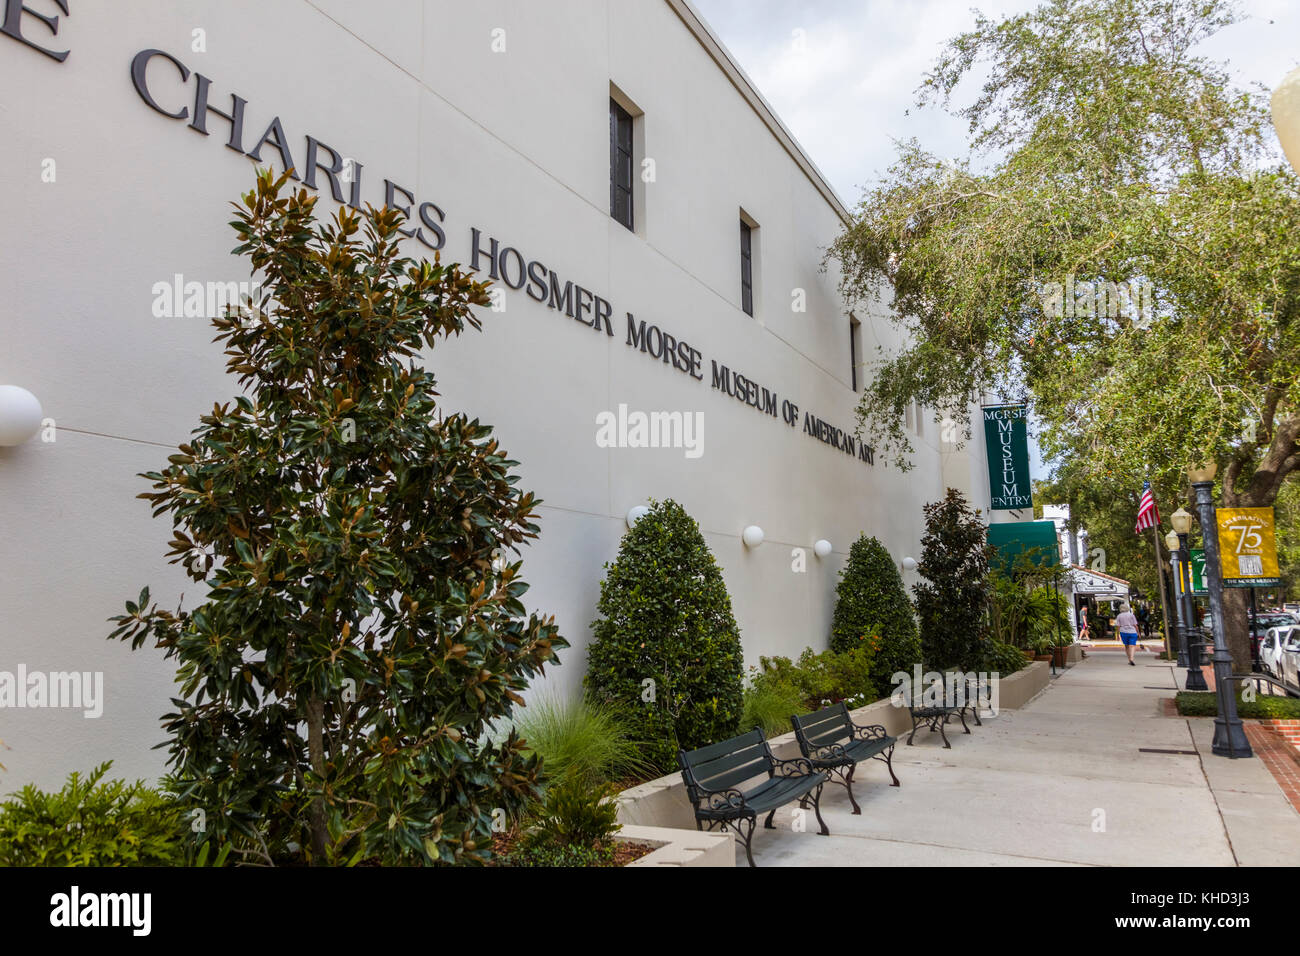 The Charles Hosmer Morse Museum of American Art on Park Avenue in Winter Park Florida United States Stock Photo